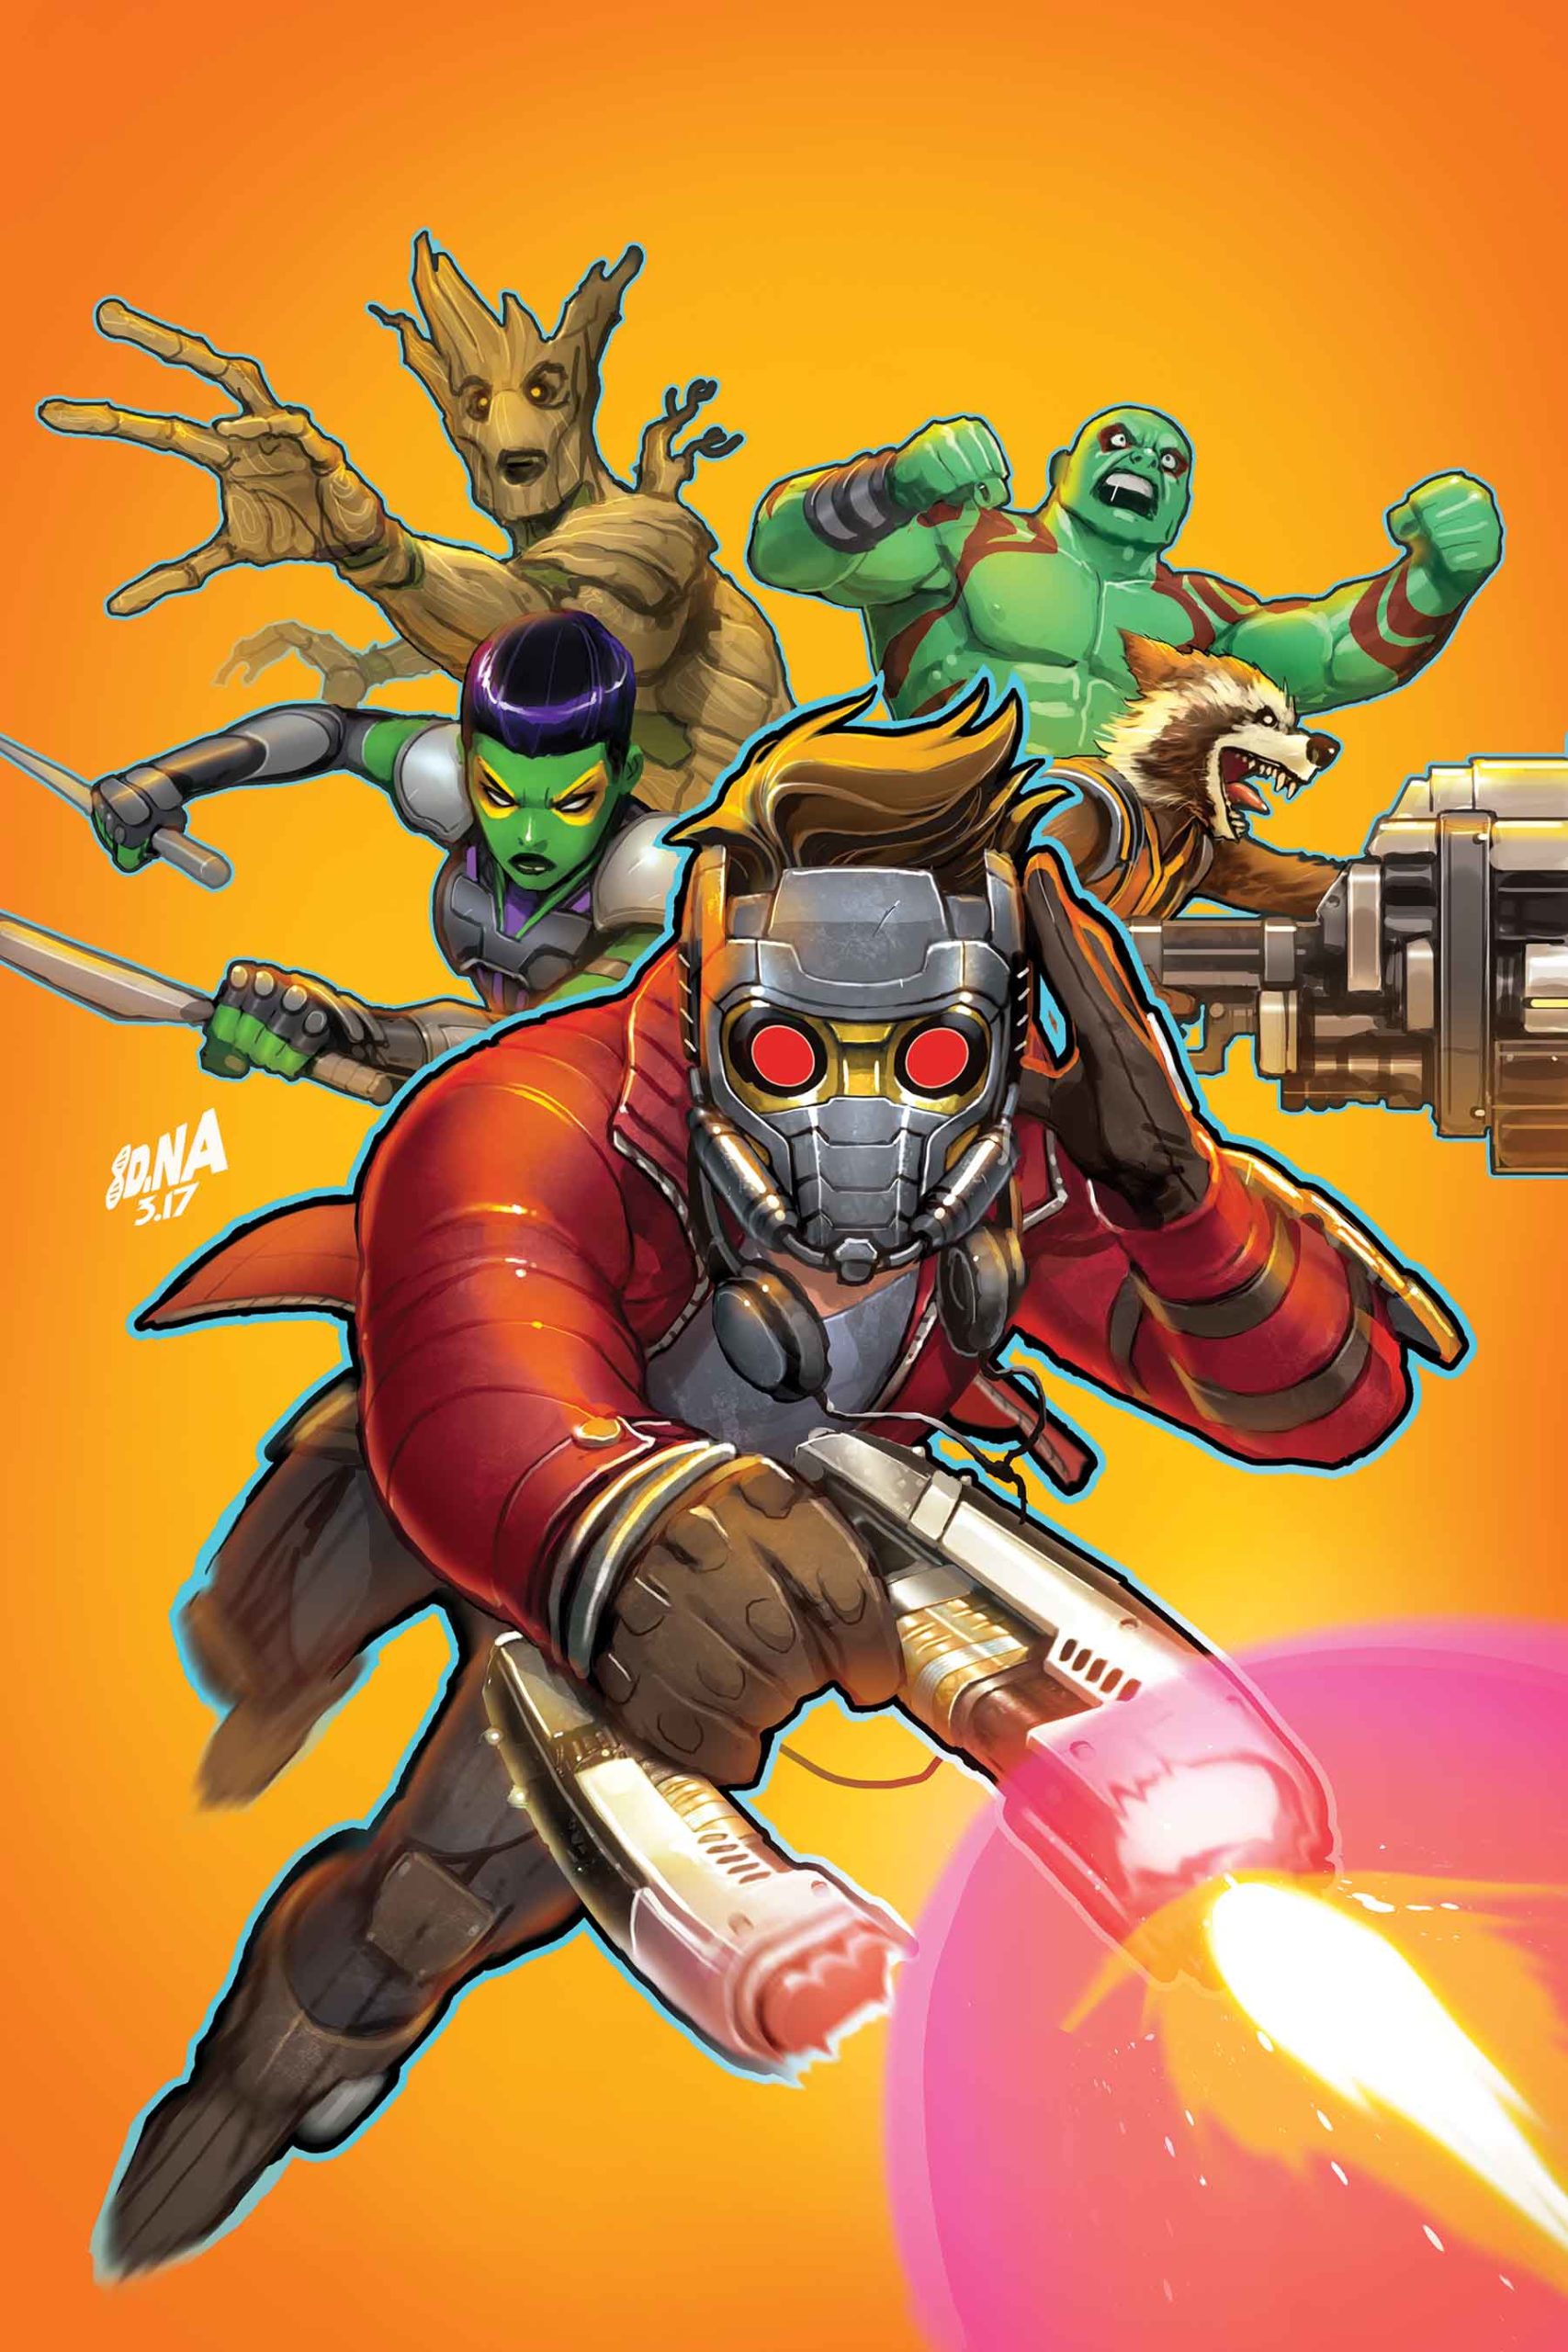 The Guardians Of The Galaxy Game, Based On The Guardians Of The Galaxy Comic, Is Getting Its Own Guardians Of The Galaxy Comic